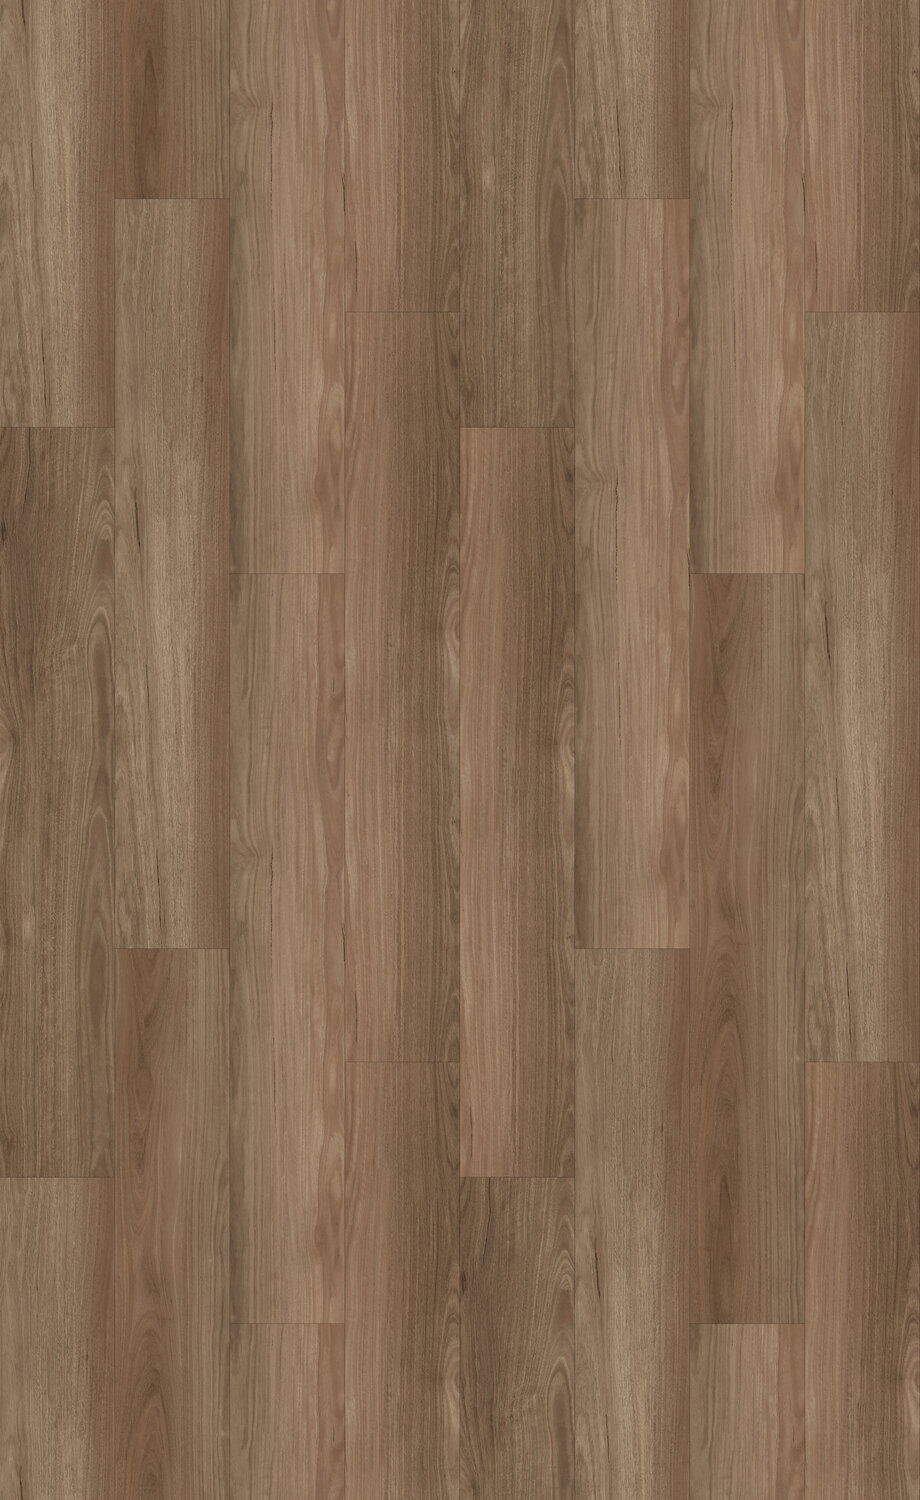 Virtuo Classic 55 xl 3003 Astir Spotted Gum Swatch.jpg